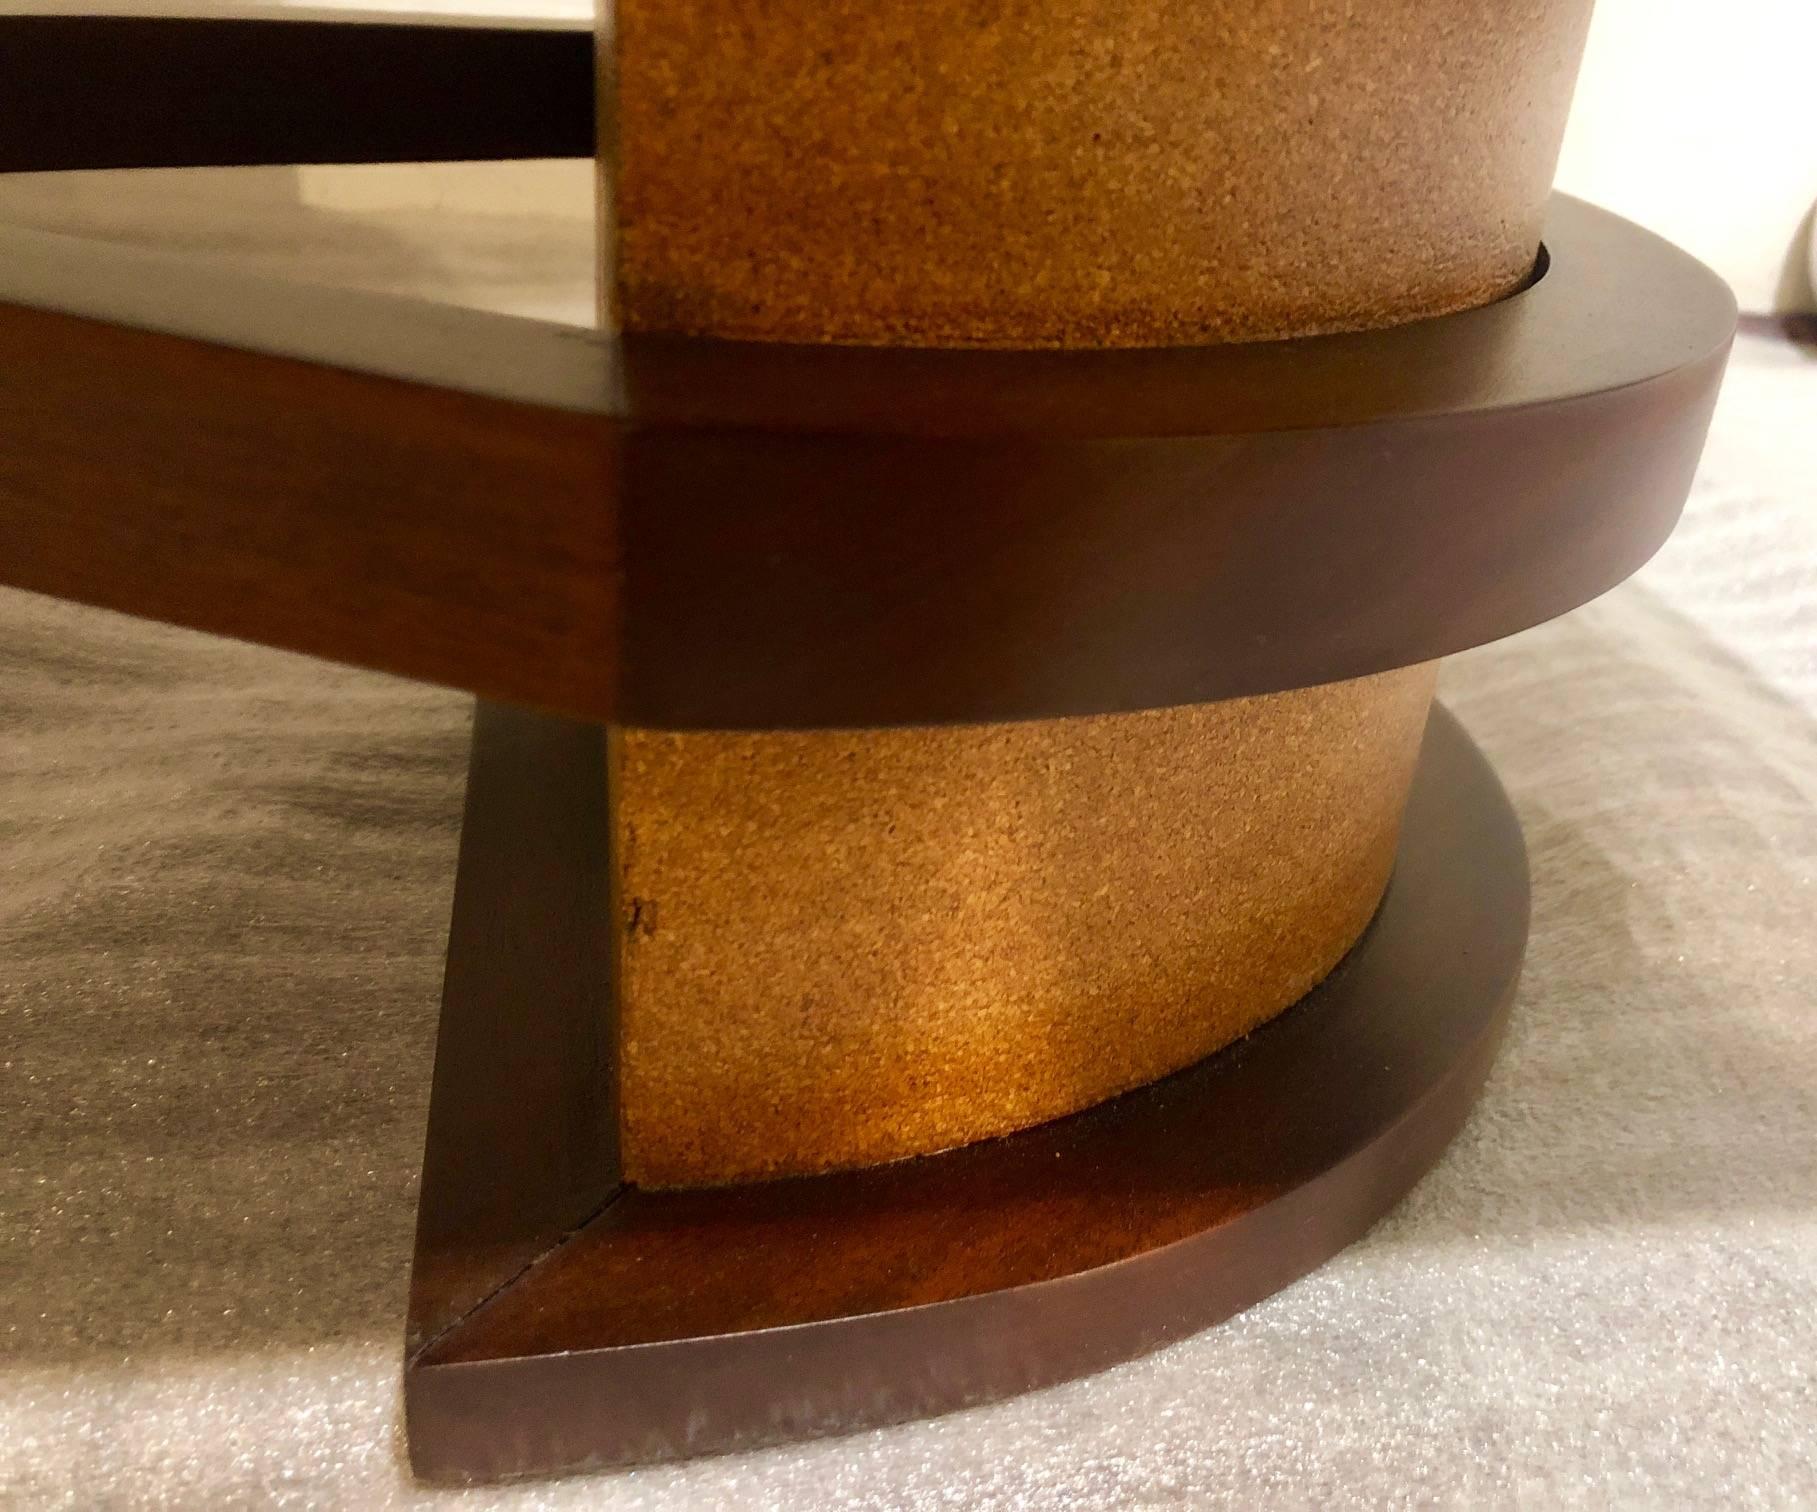 Neoclassical Customized Cocktail Table by Roberto and Mito Block, México, 1953